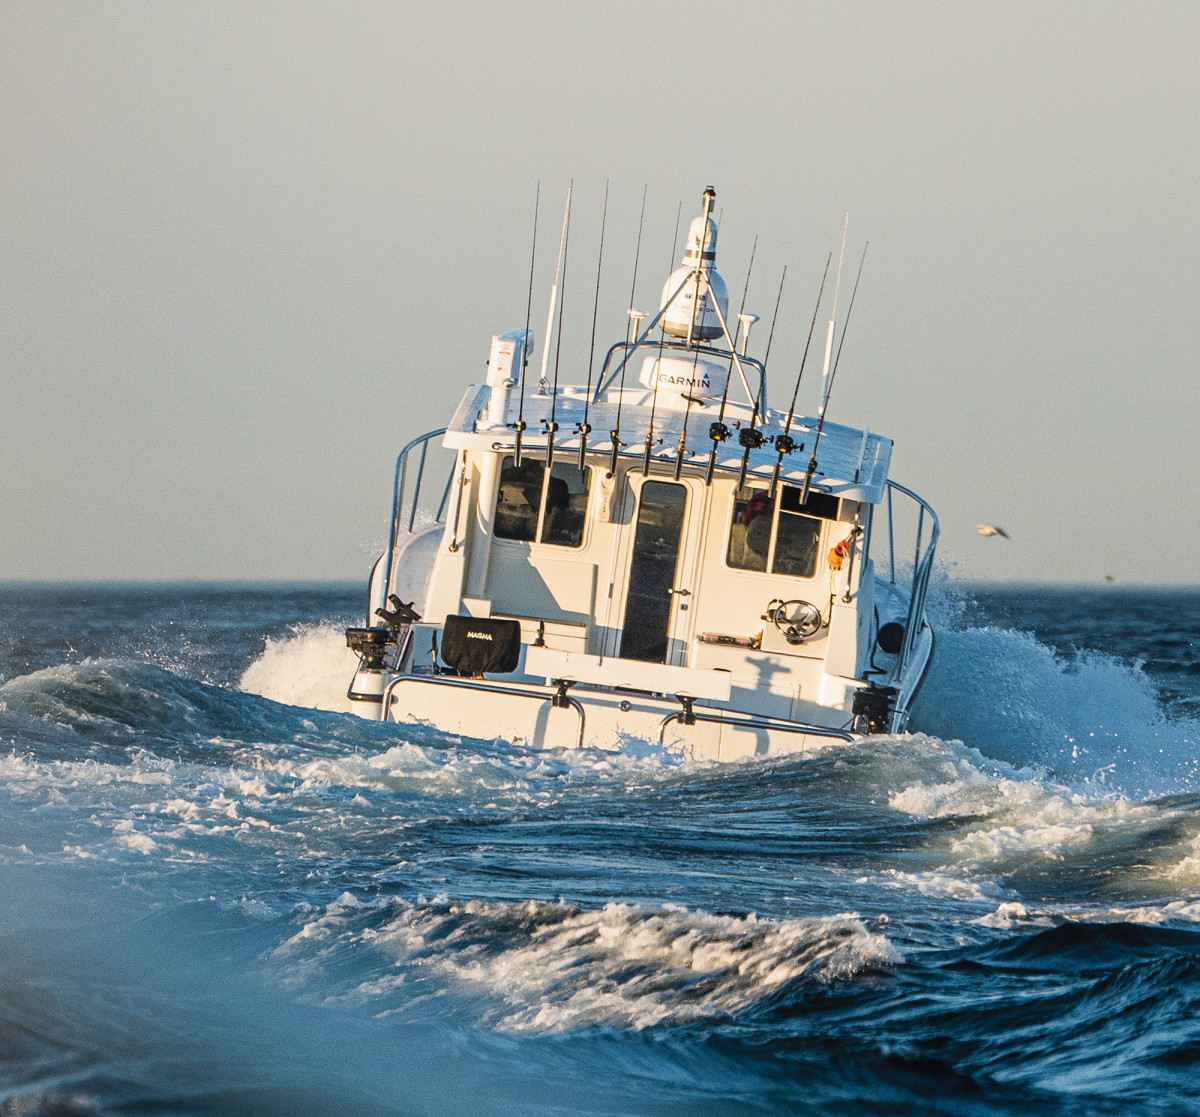 Pitch and roll are put to ease in the 41 thanks to the built-in Seakeeper.